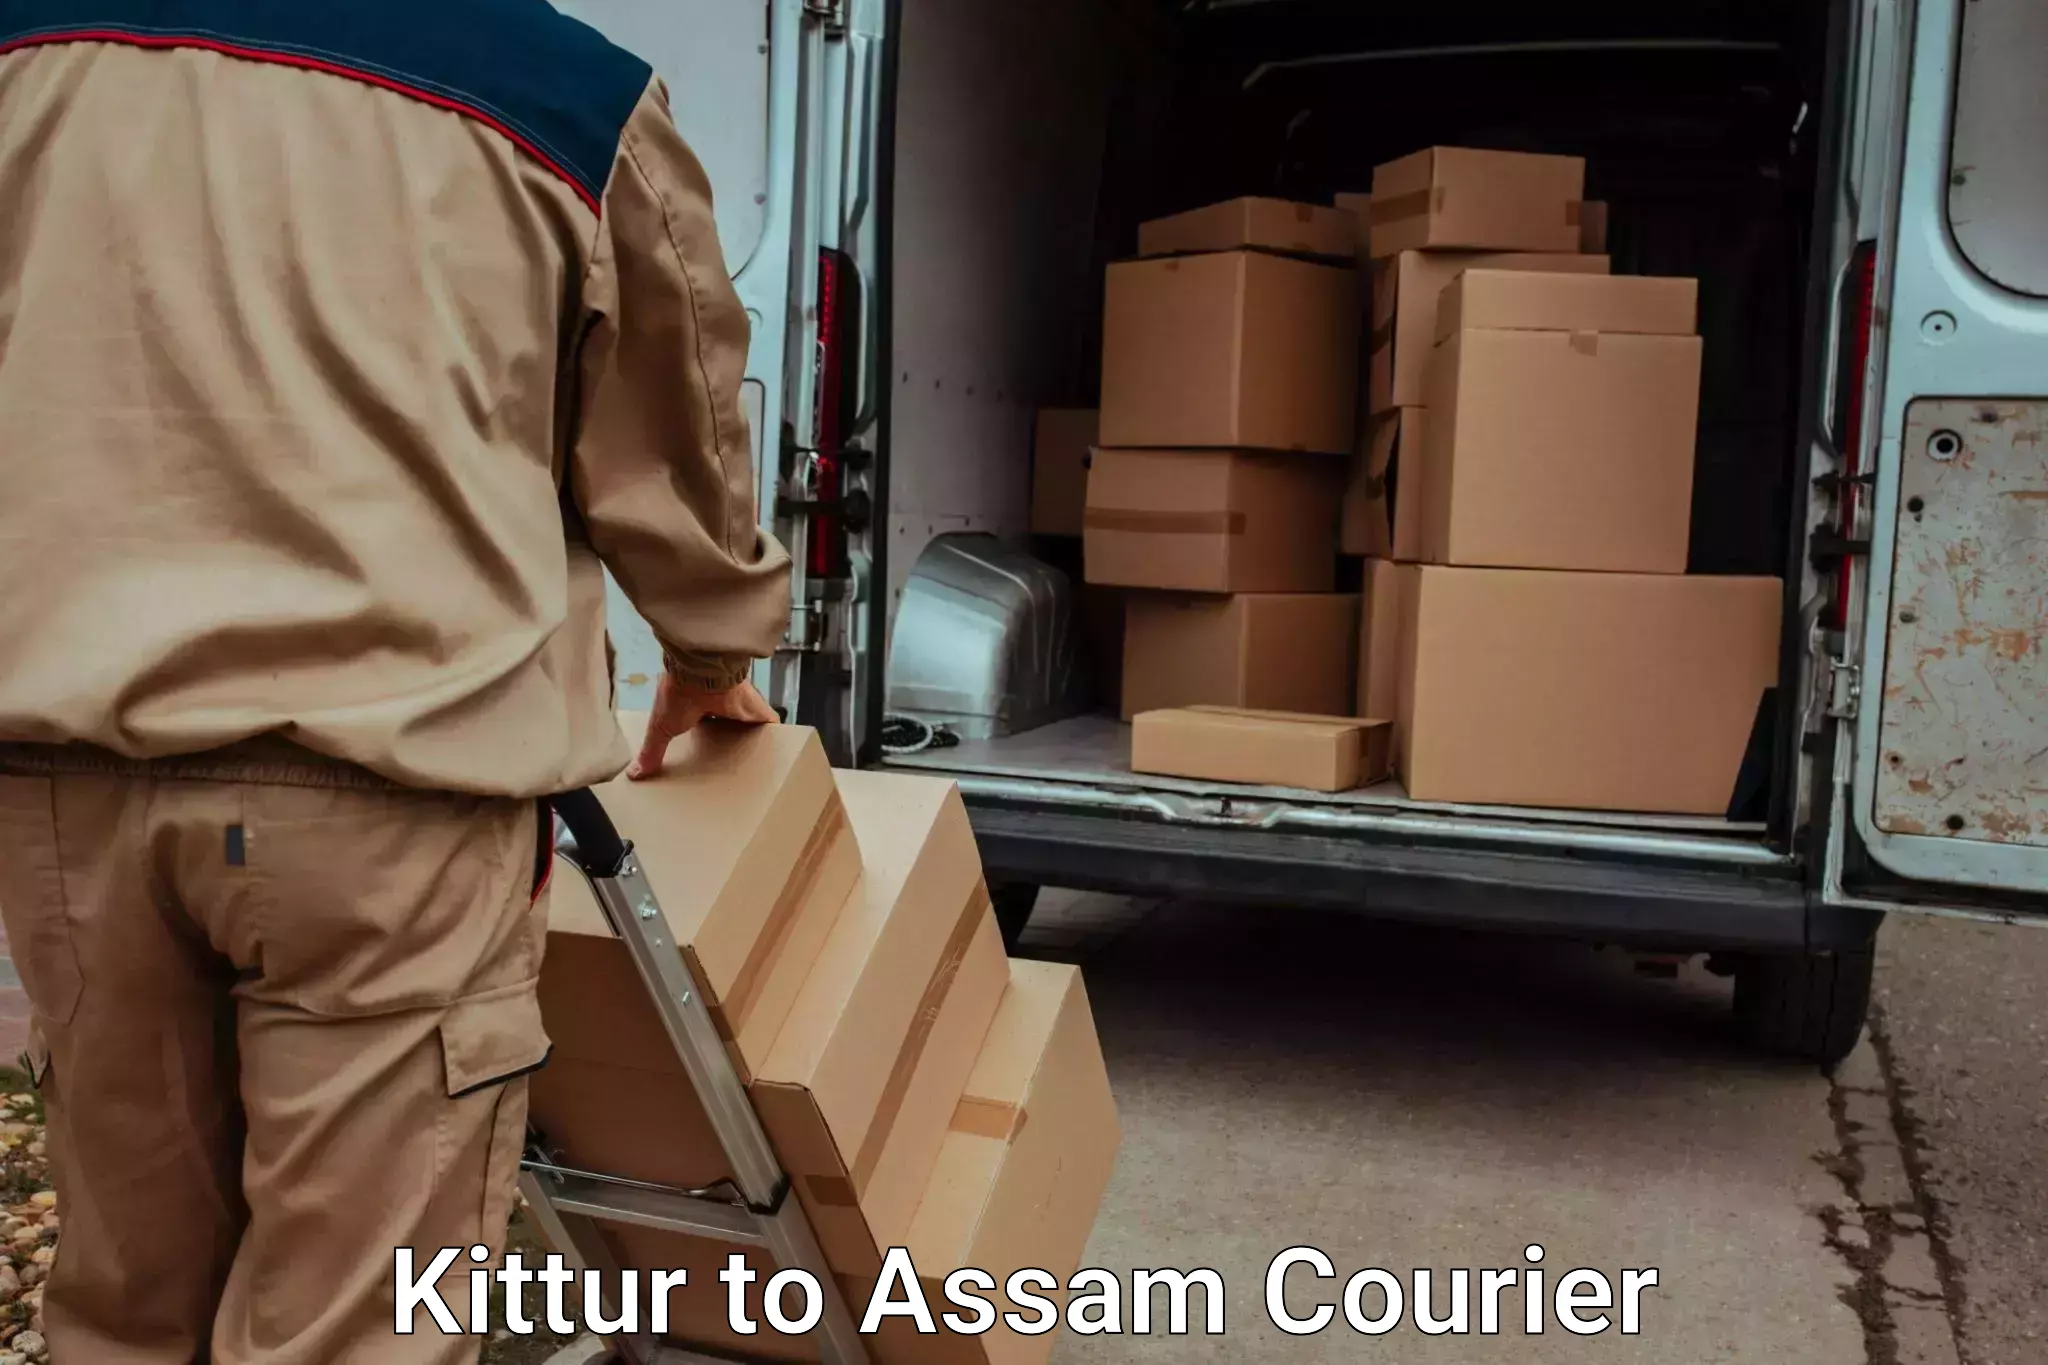 Luggage shipment tracking in Kittur to Udharbond